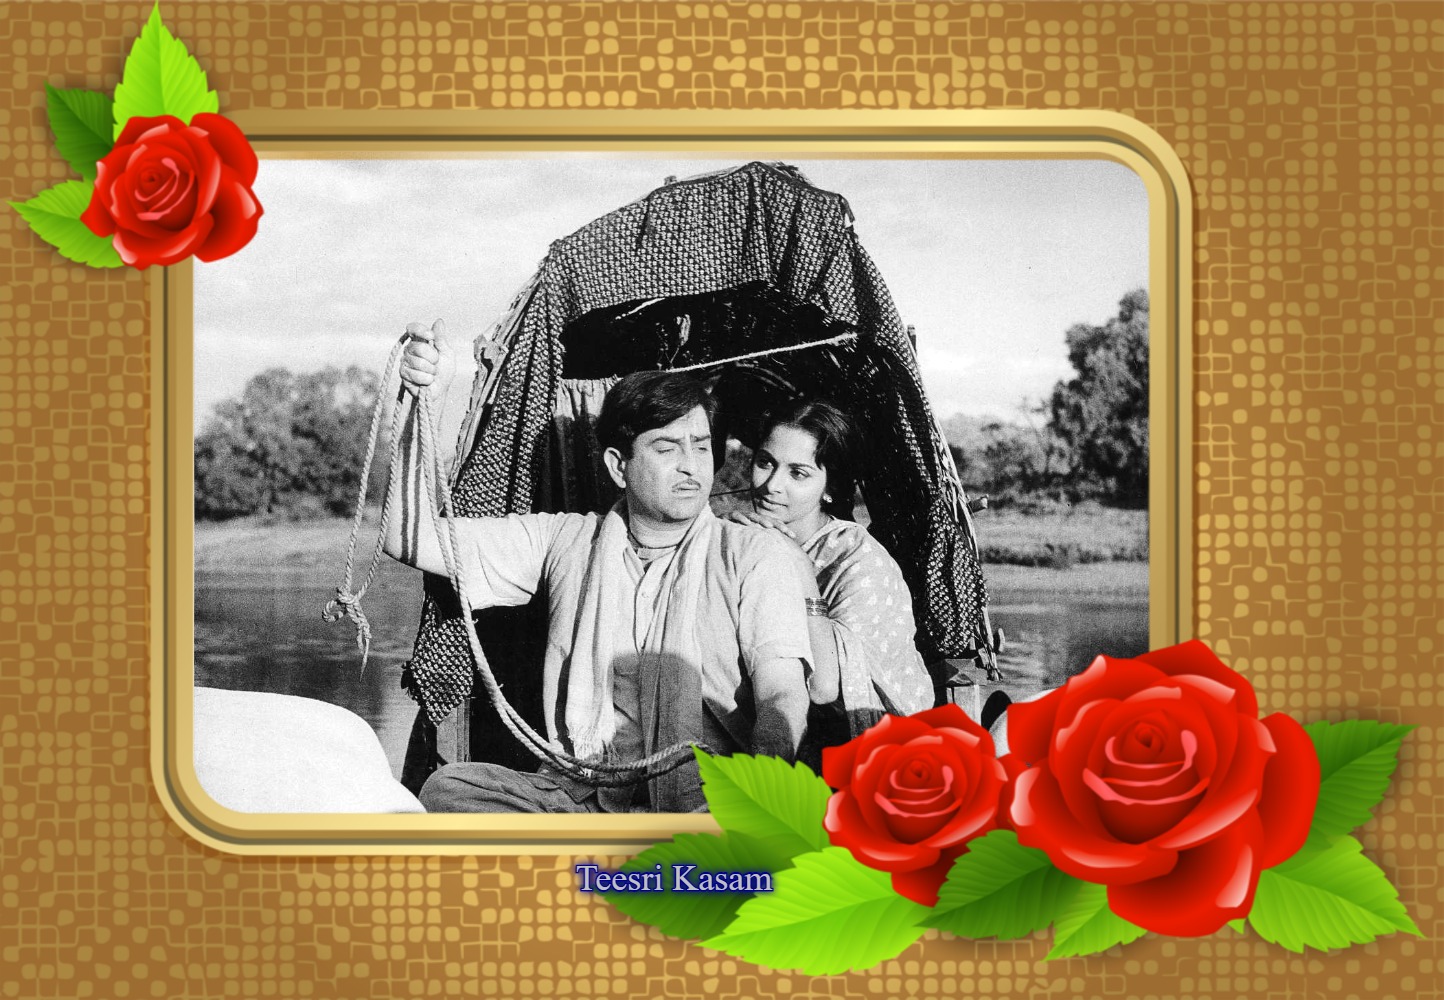 You are currently viewing “Raj Kapoor-Prolific Director & Showman”